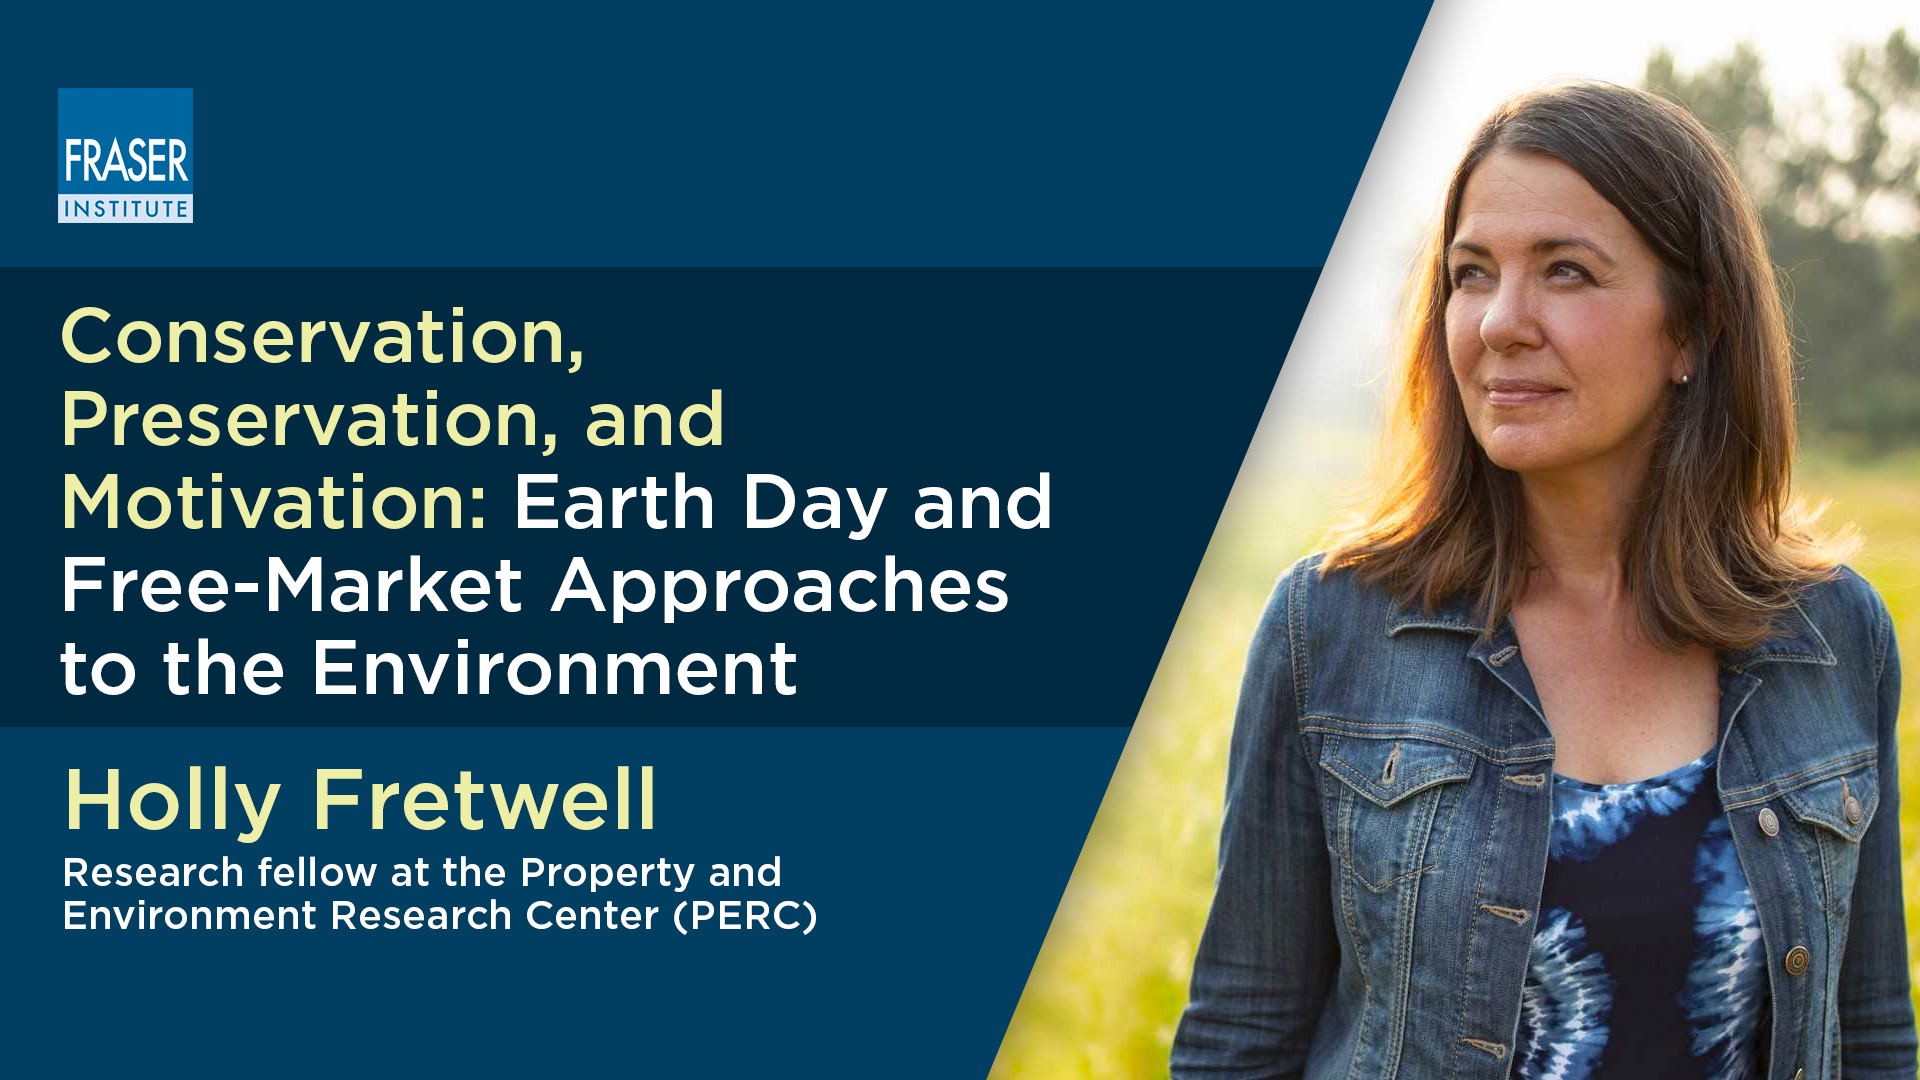 Conservation, Preservation, and Motivation: Earth Day and Free-Market Approaches to the Environment